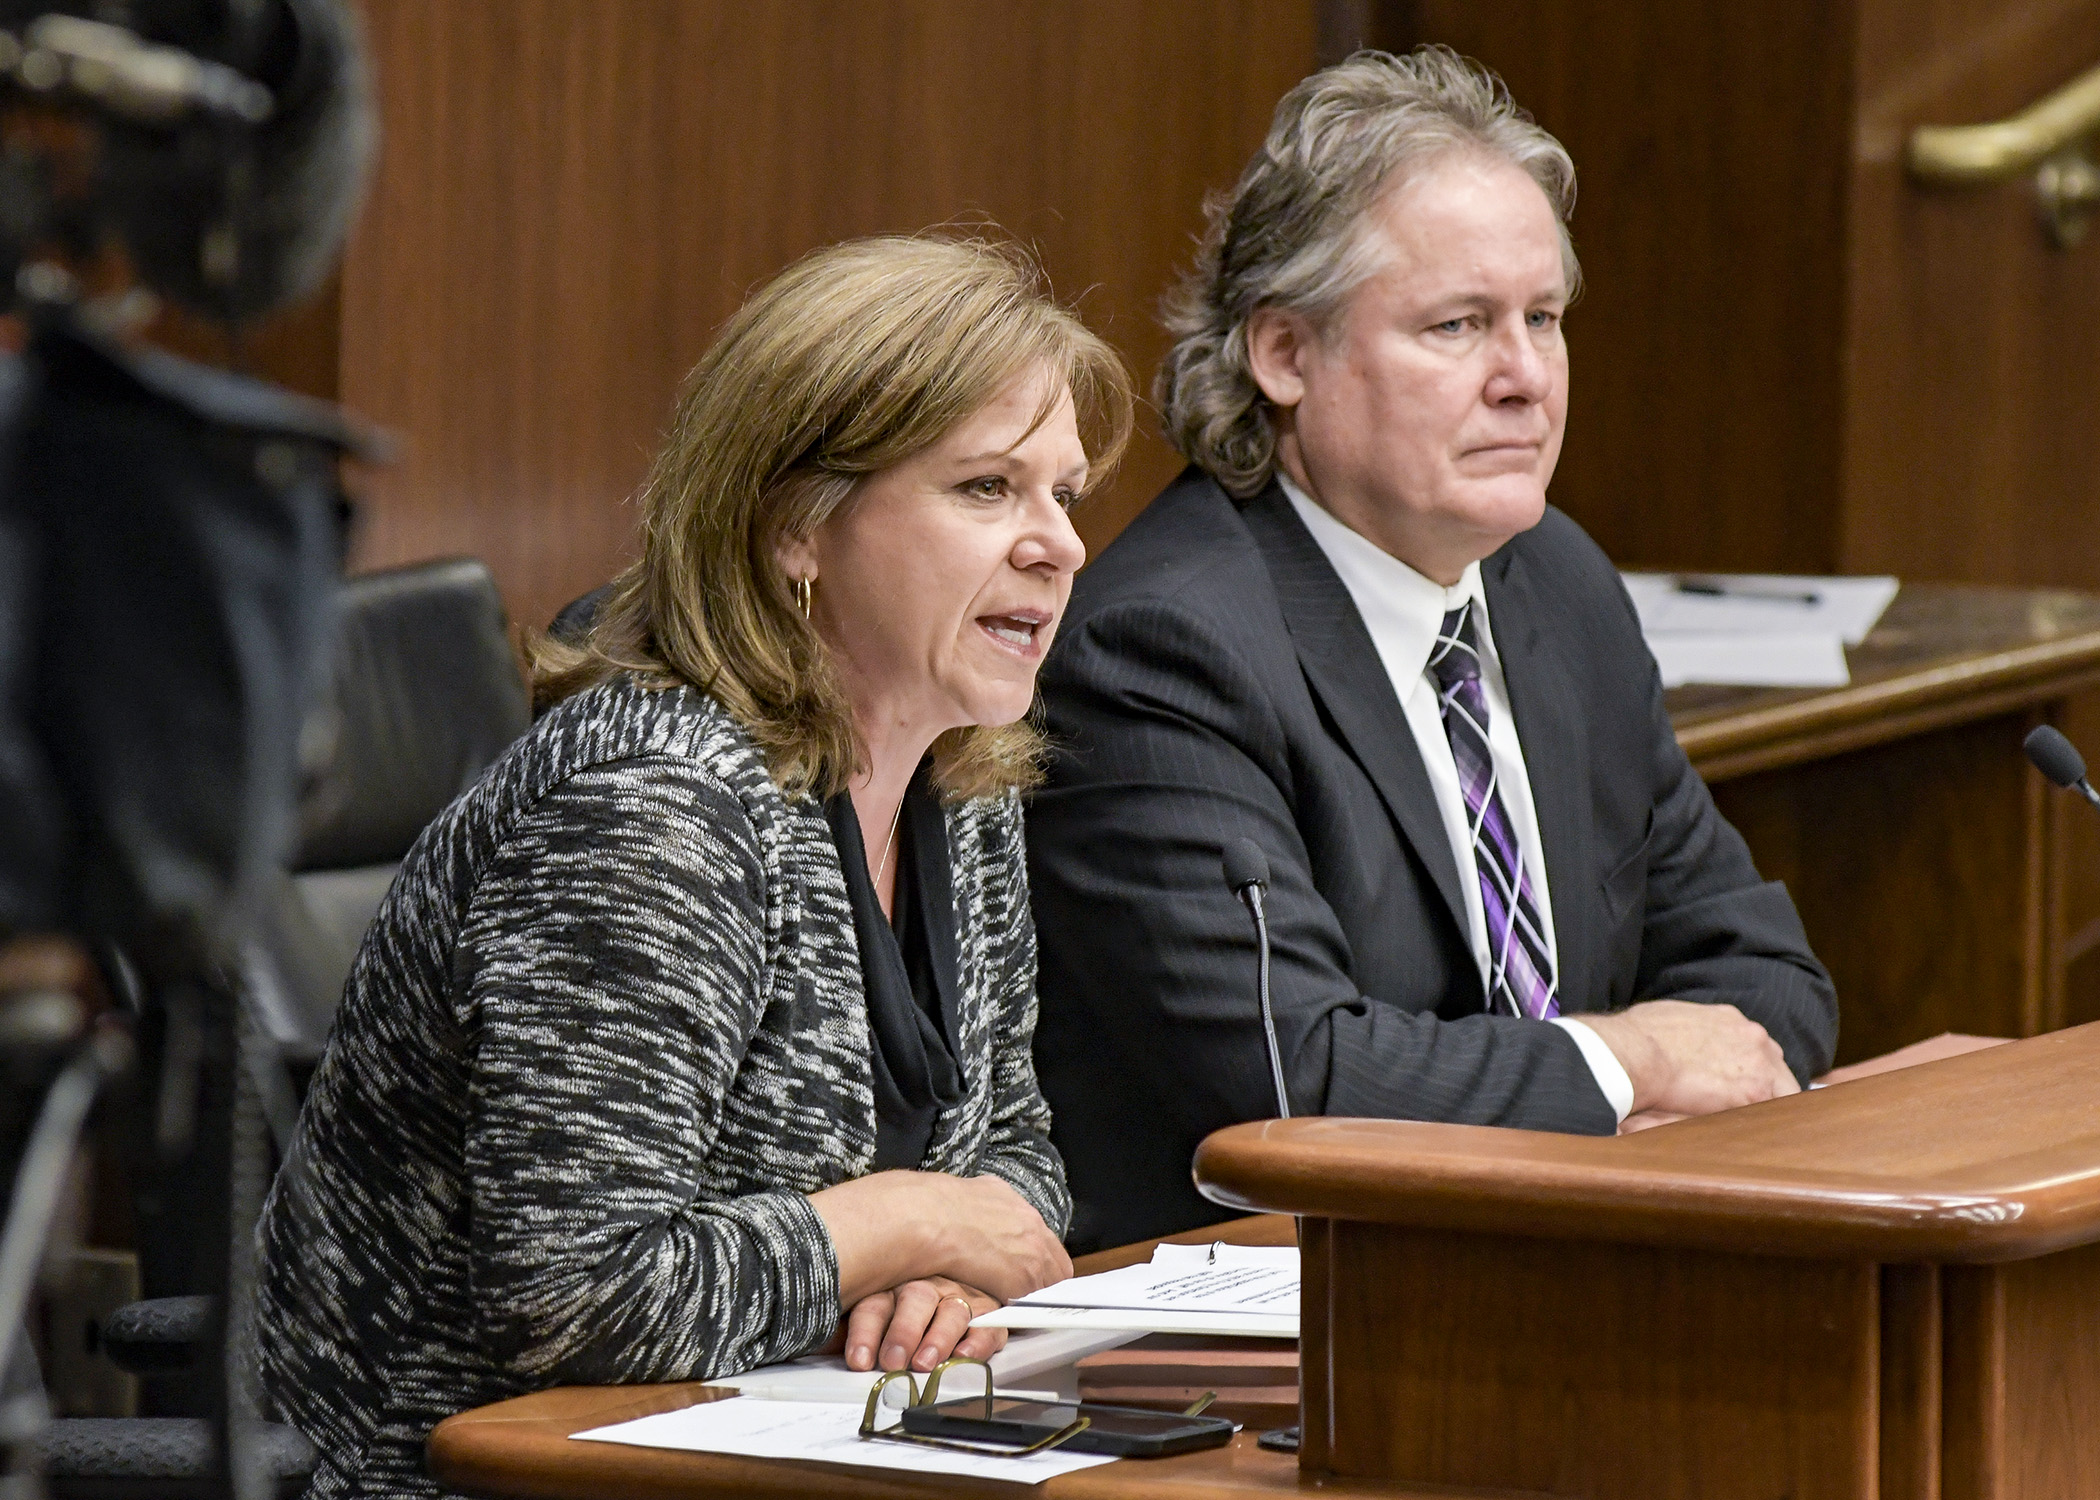 Public Safety Commissioner Mona Dohman and MN.IT Commissioner Tom Baden answer questions from the Select Committee on Technology and Responsive Government during a Dec. 6 update on the Minnesota Licensing and Registration System. Photo by Andrew VonBank